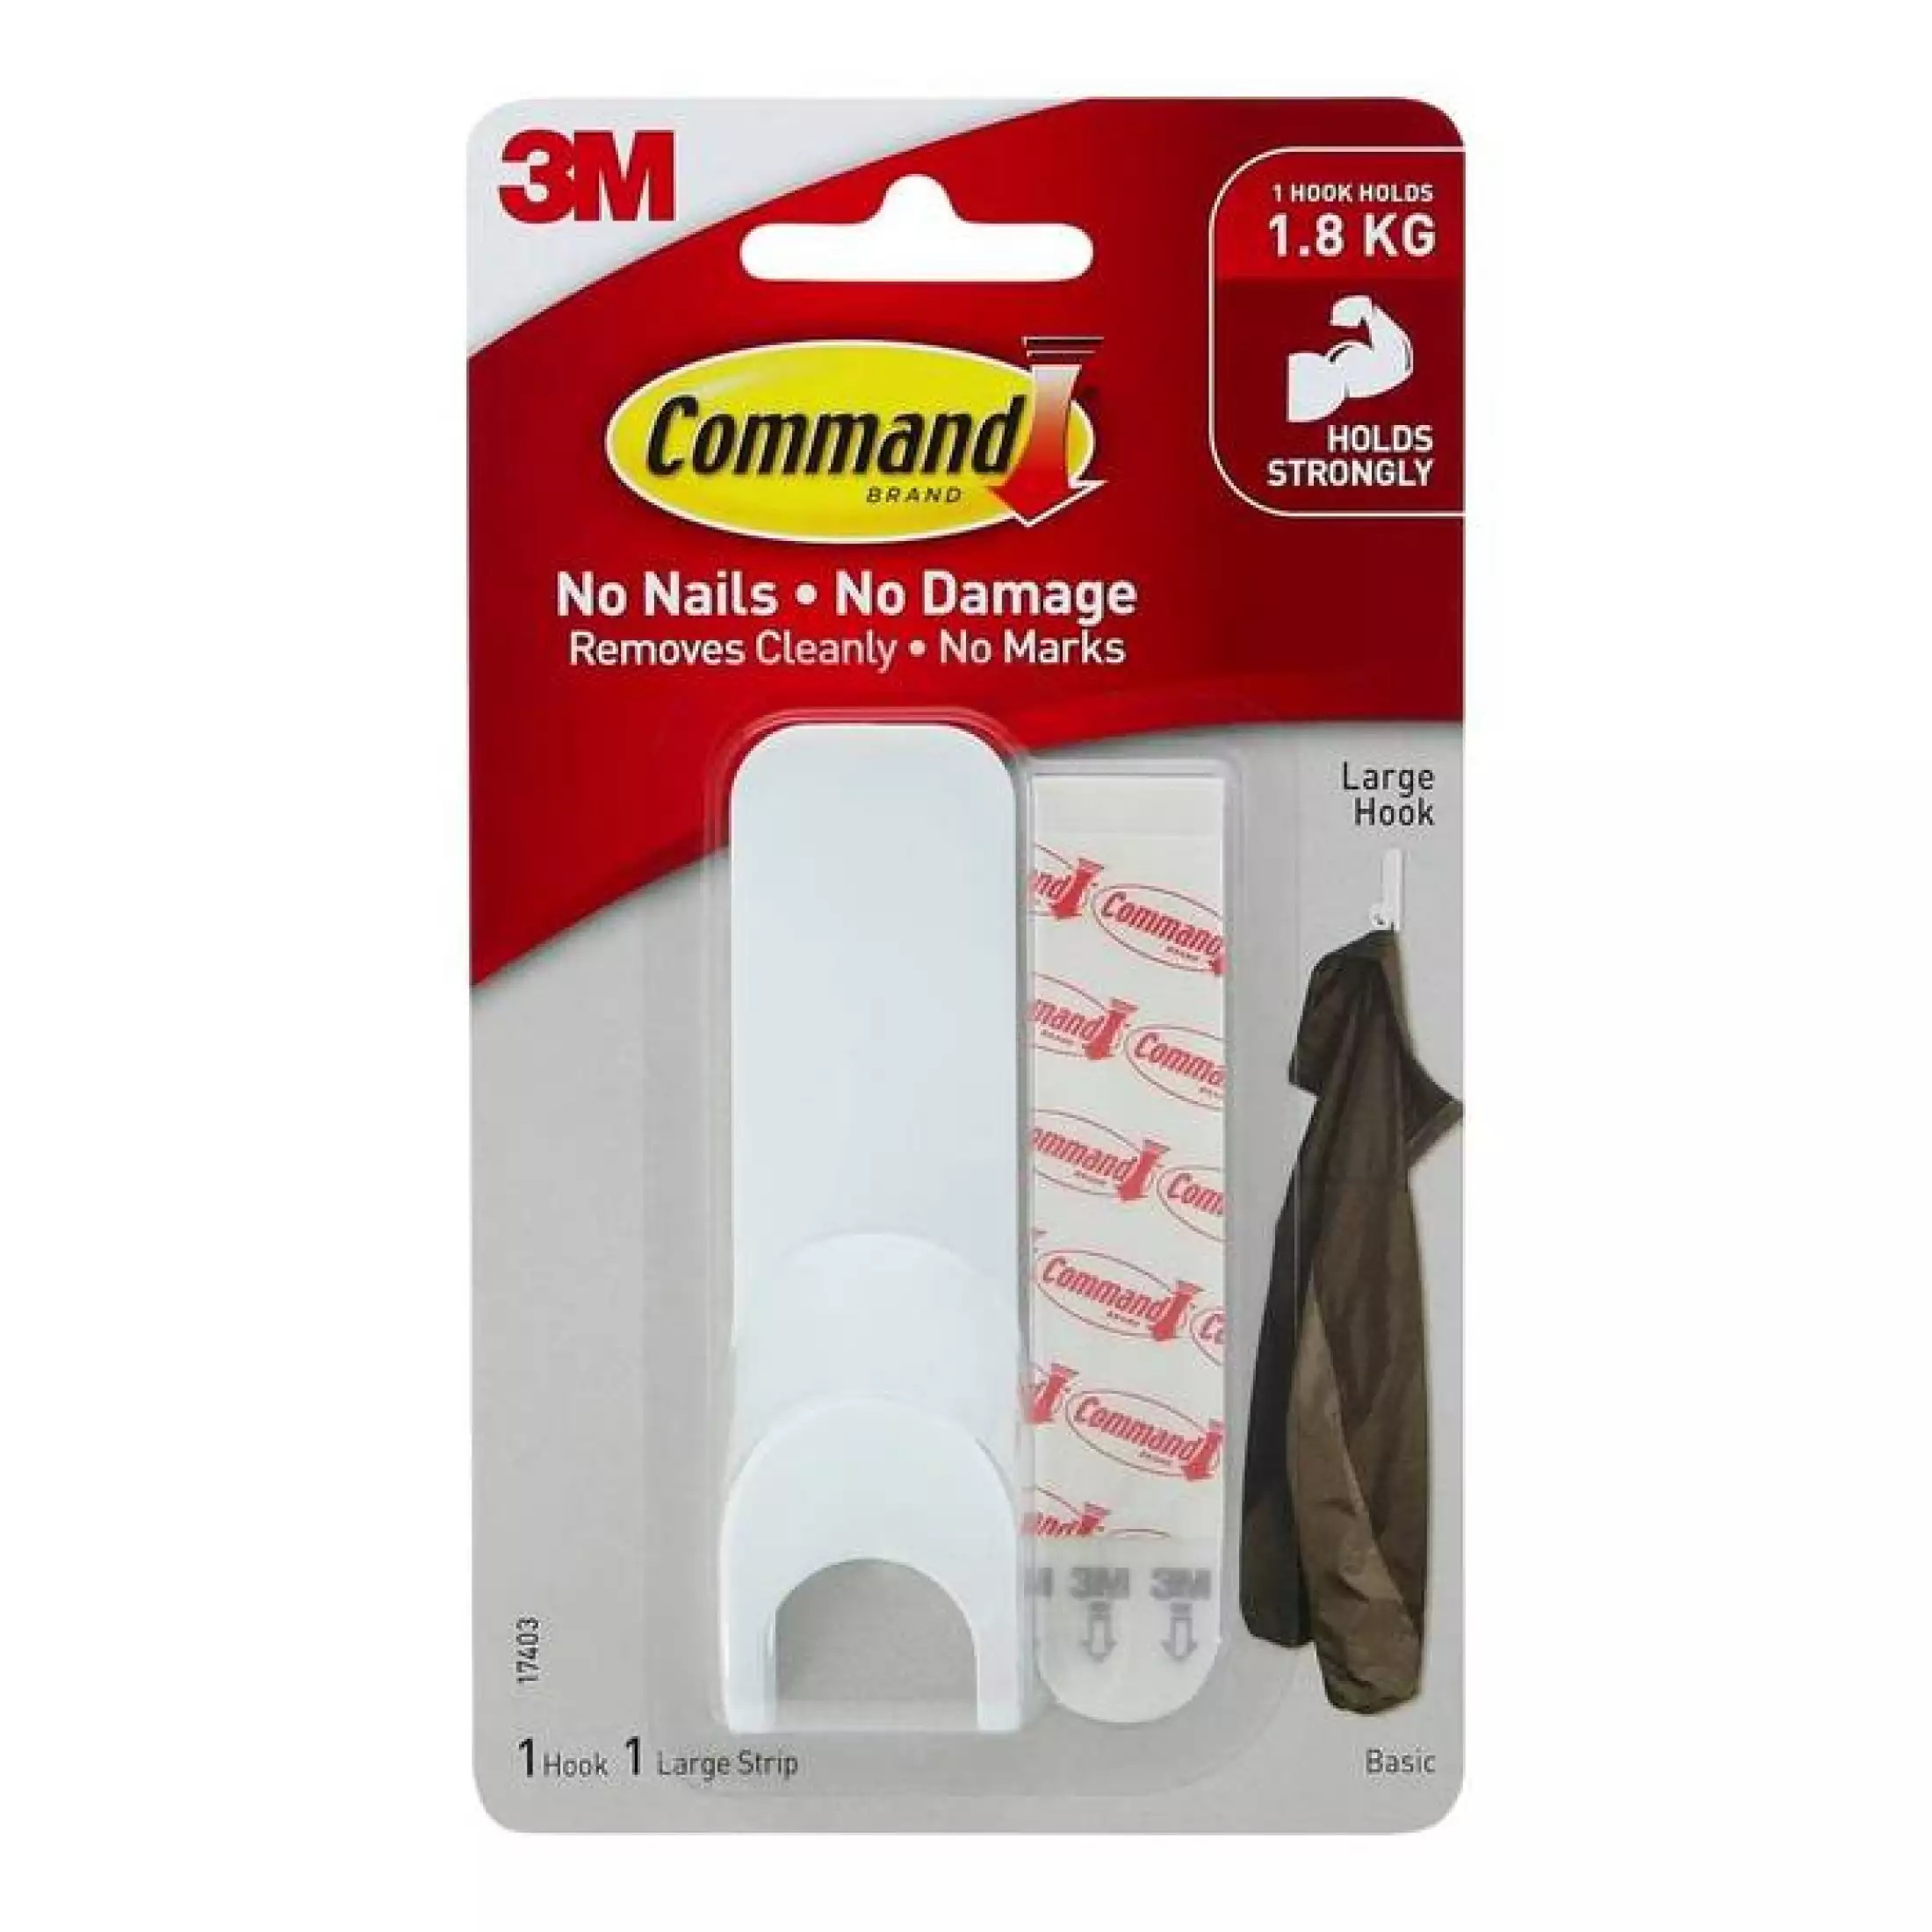 3M Command 17403ANZ Large Round Hook Holds 1.8KG